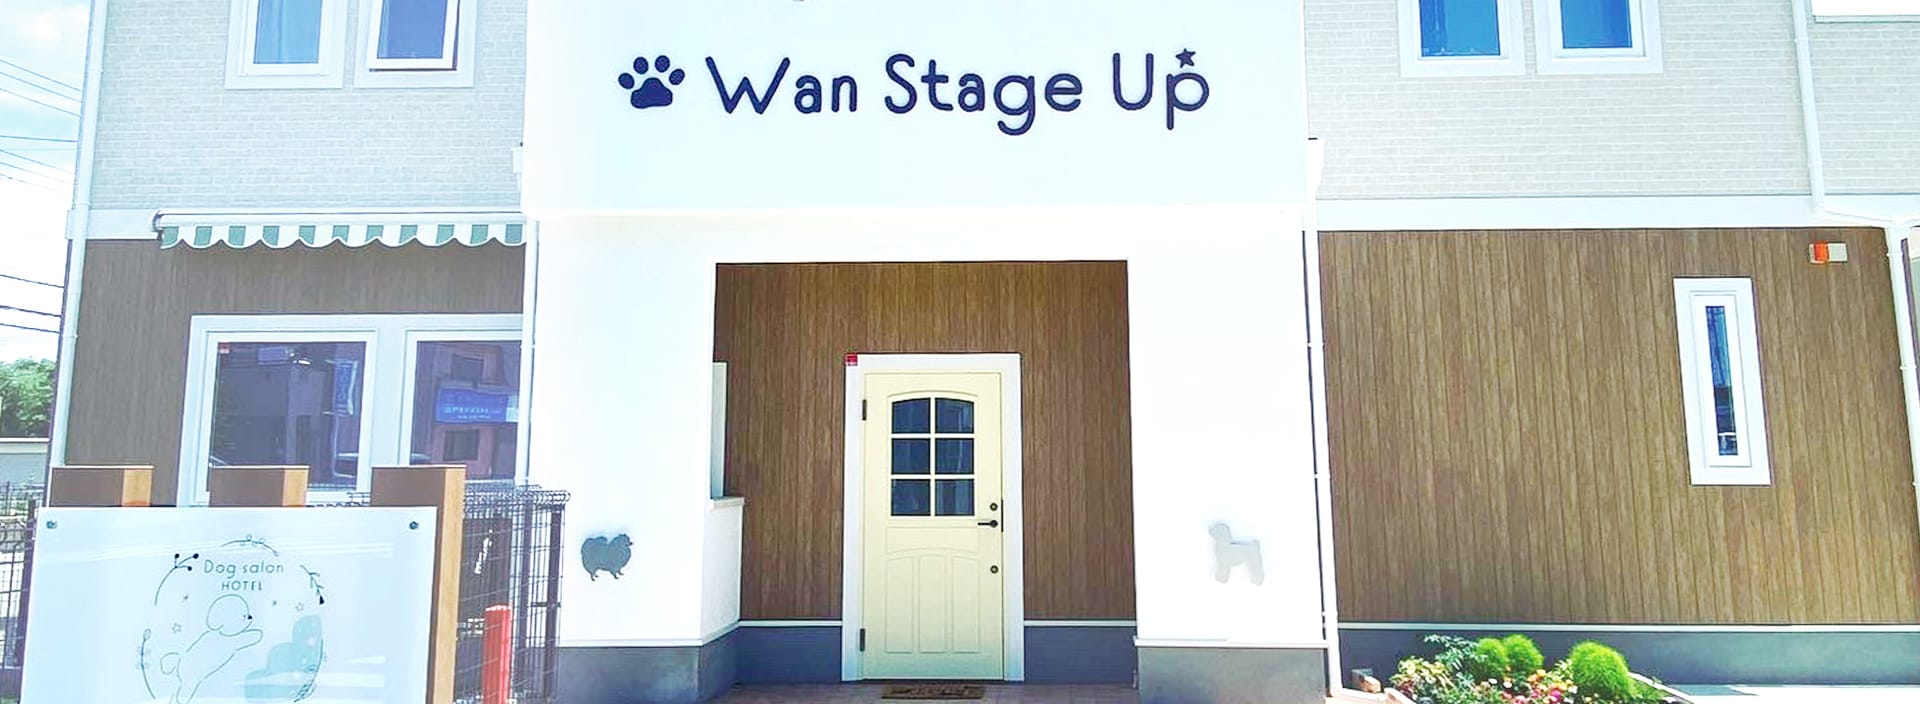 Wan Stage Up